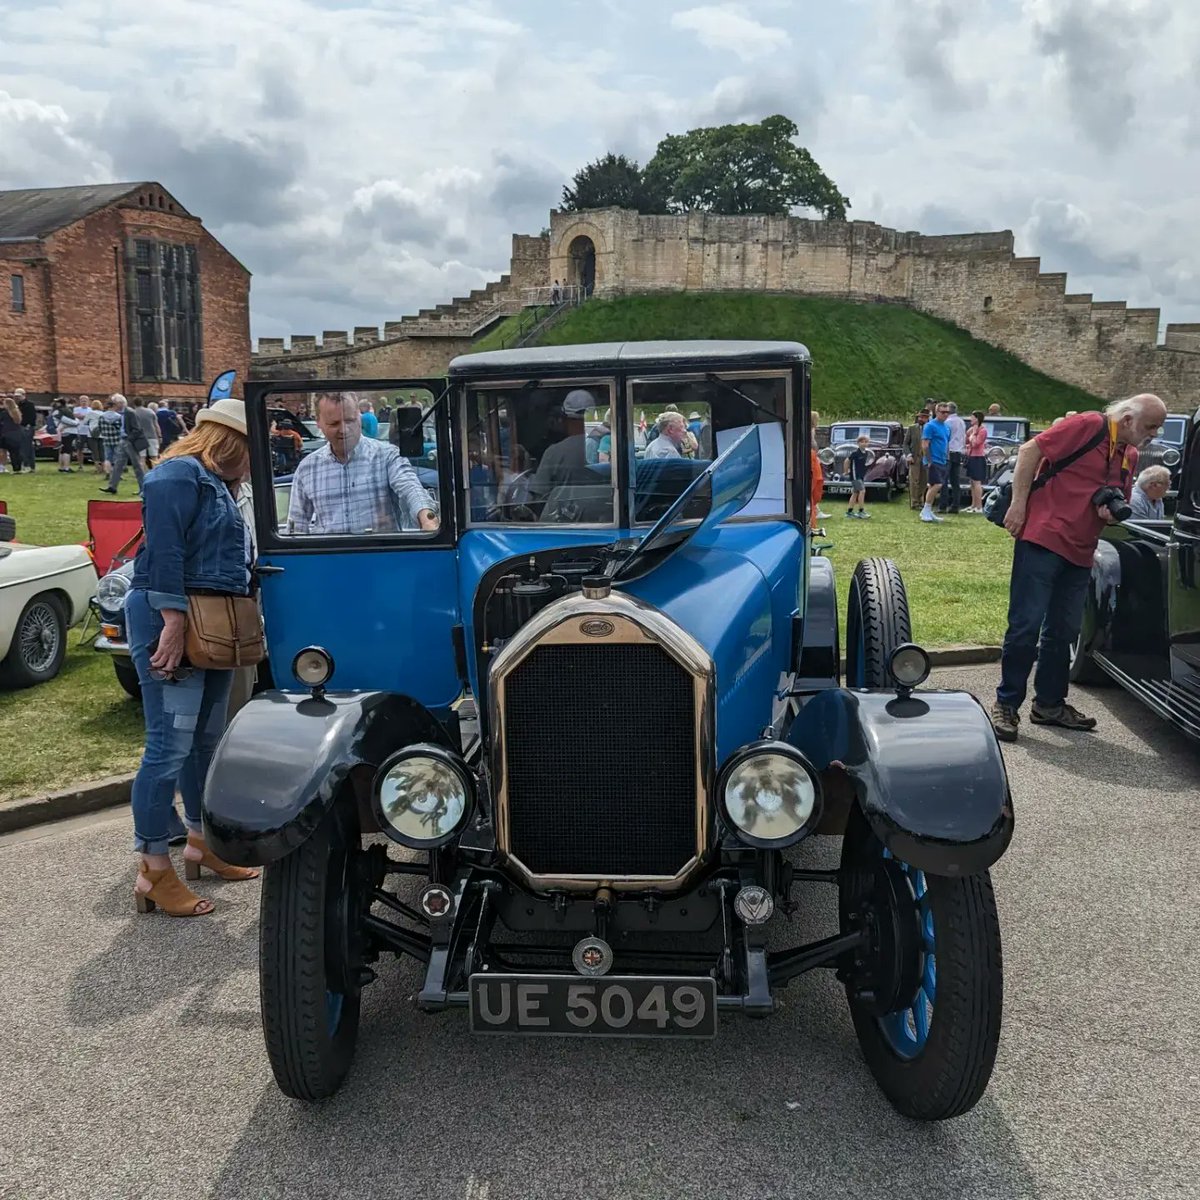 Lincoln Castle Classic Cars Event #Lincolncastle #Lincoln #Lincolnshire #Castle #Classiccars #classiccarshow #cars #castle #lincolncathedral #discoverlincolnshire #discoverlincoln #visitlincoln #visitlincoln #visitlincolnshire @visitlincoln @LincolnCastle @LincsCathedral